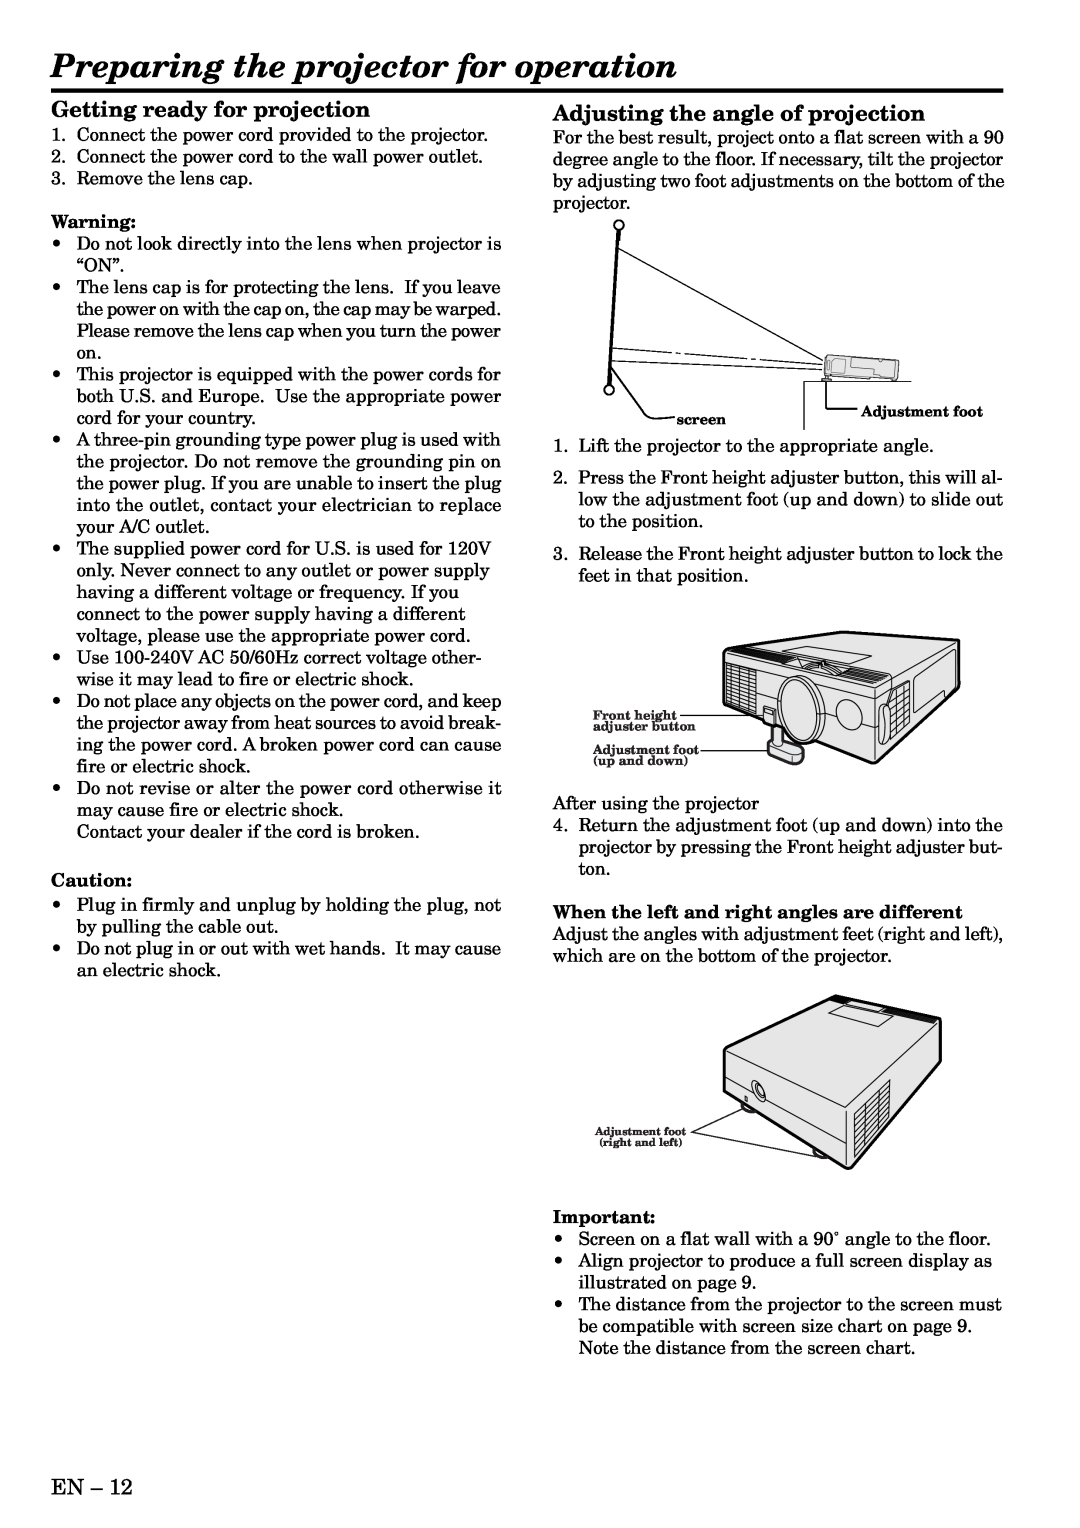 Mitsubishi Electronics X70U user manual Preparing the projector for operation, Getting ready for projection 